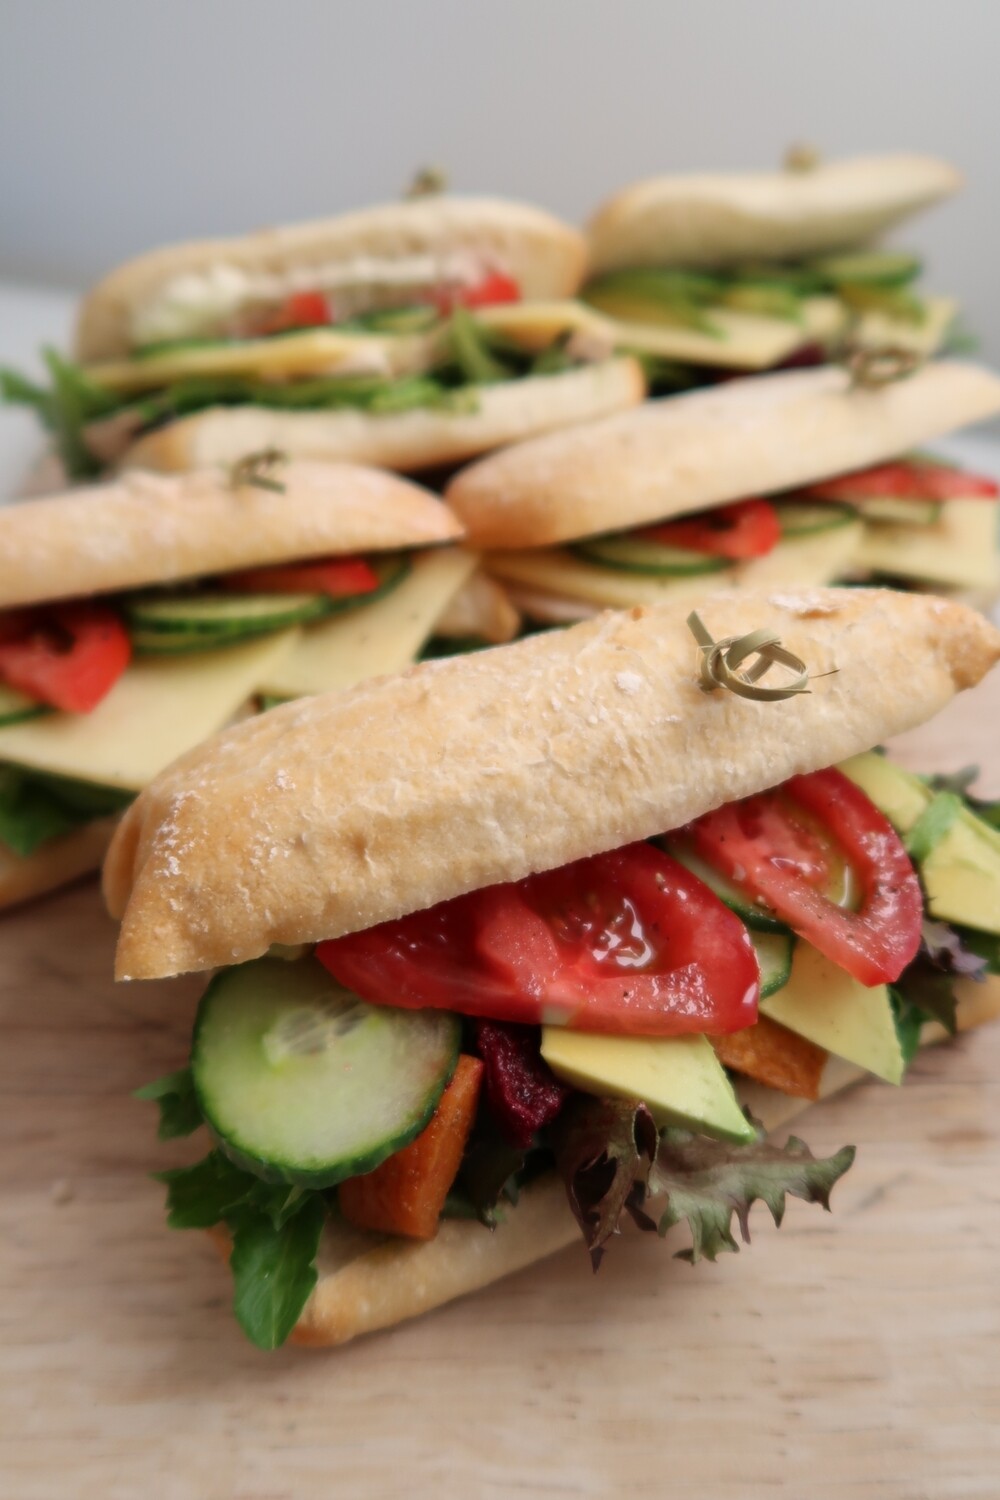 DIY CIABATTA POCKET: freshly baked, filled with salad greens, cucumber, tomato and your choice spread and filling.